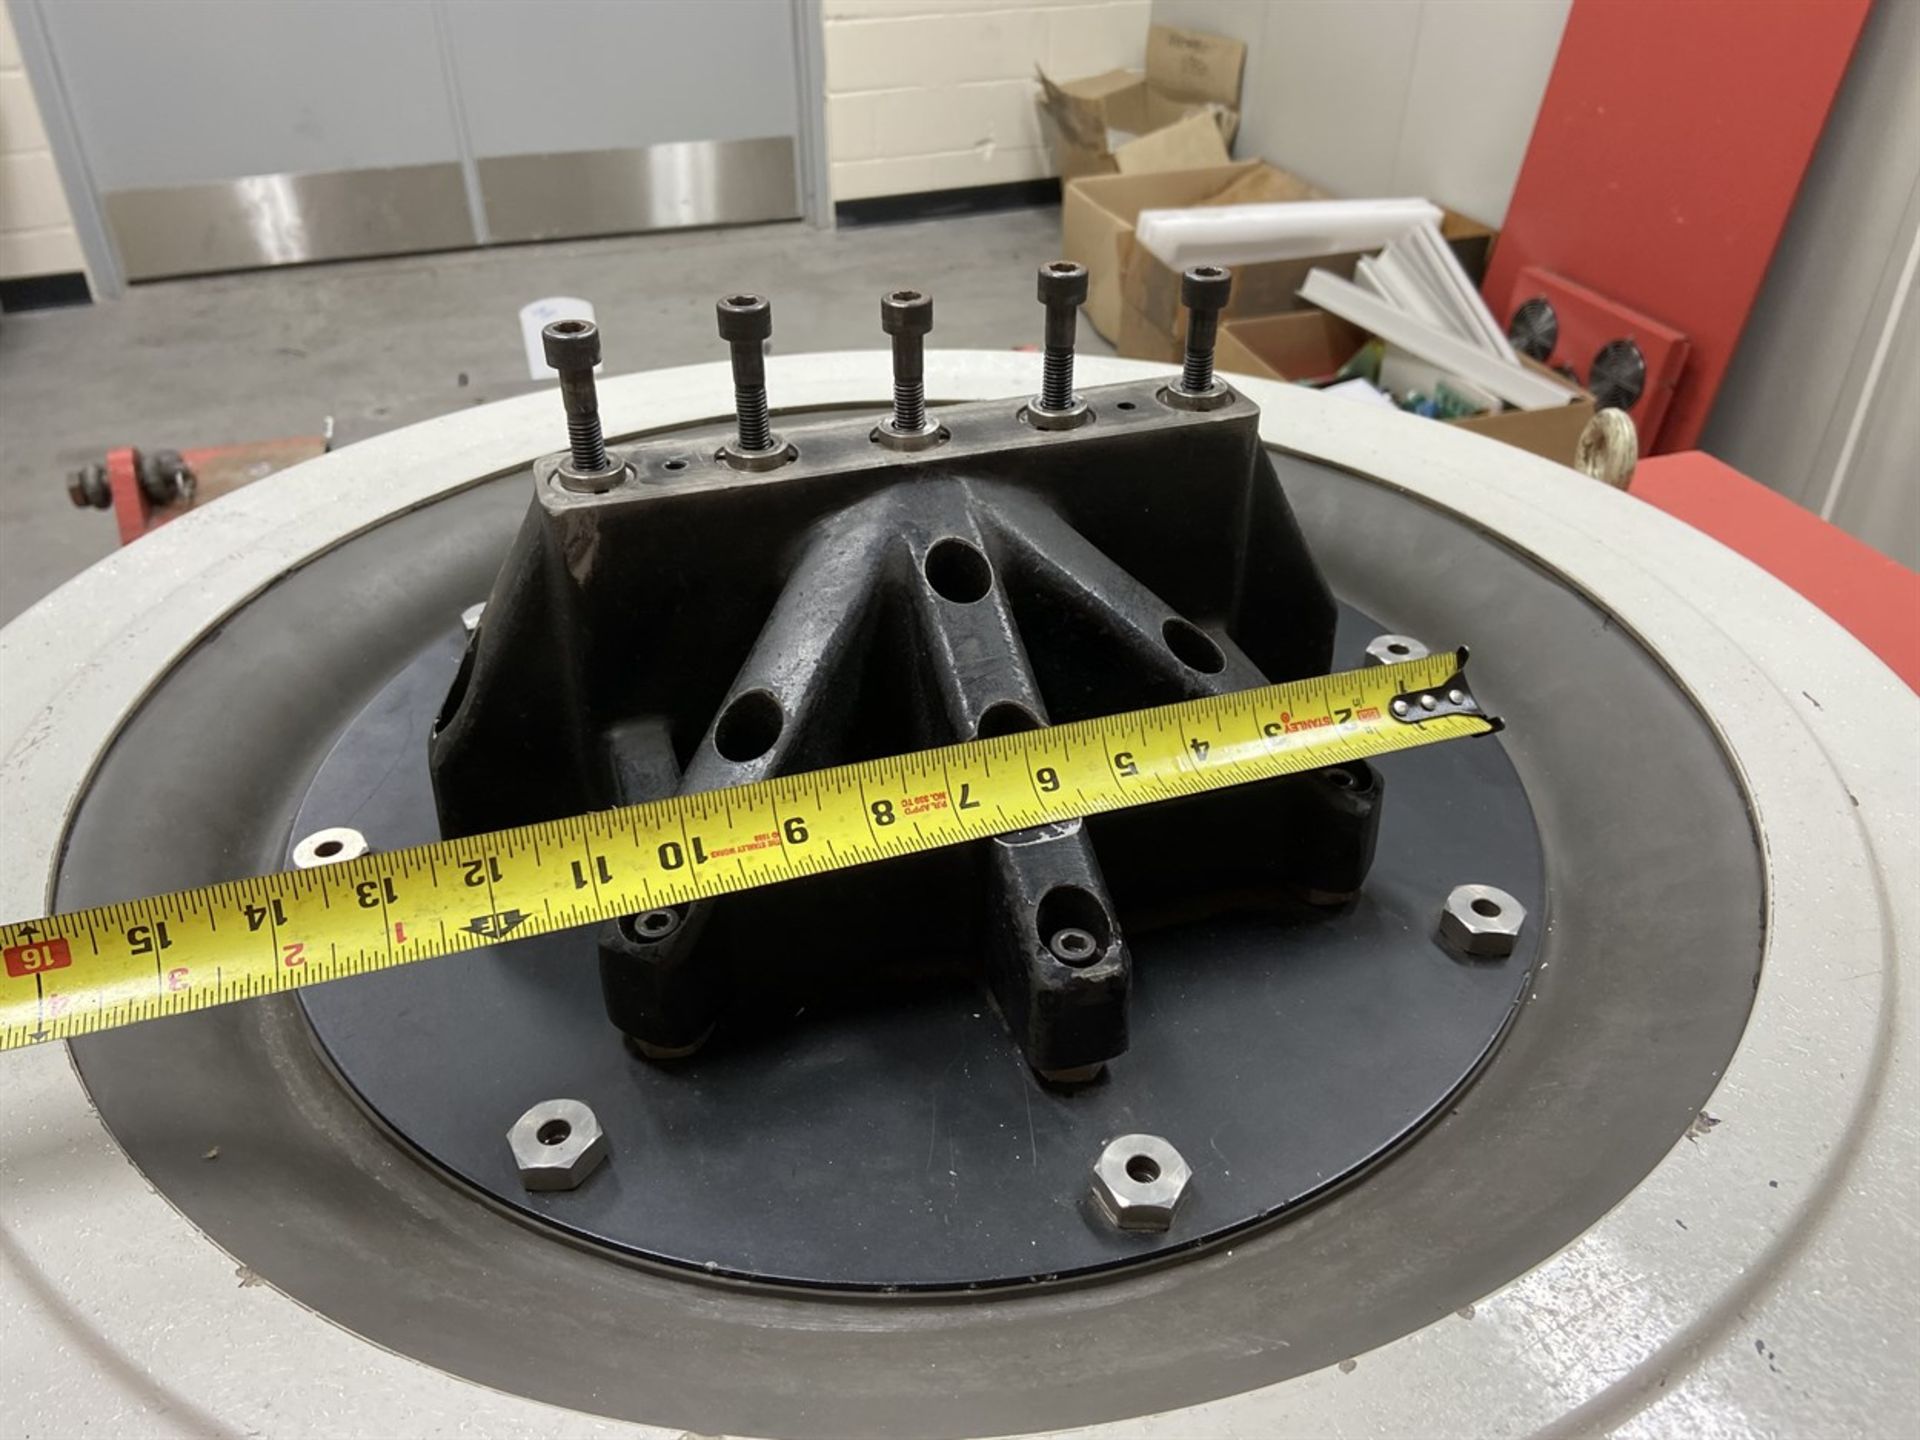 LDS Vibration Table with Isolation Control, Slip Table Control, 23.5" x 28" Platen, 12" Diameter - Image 19 of 19